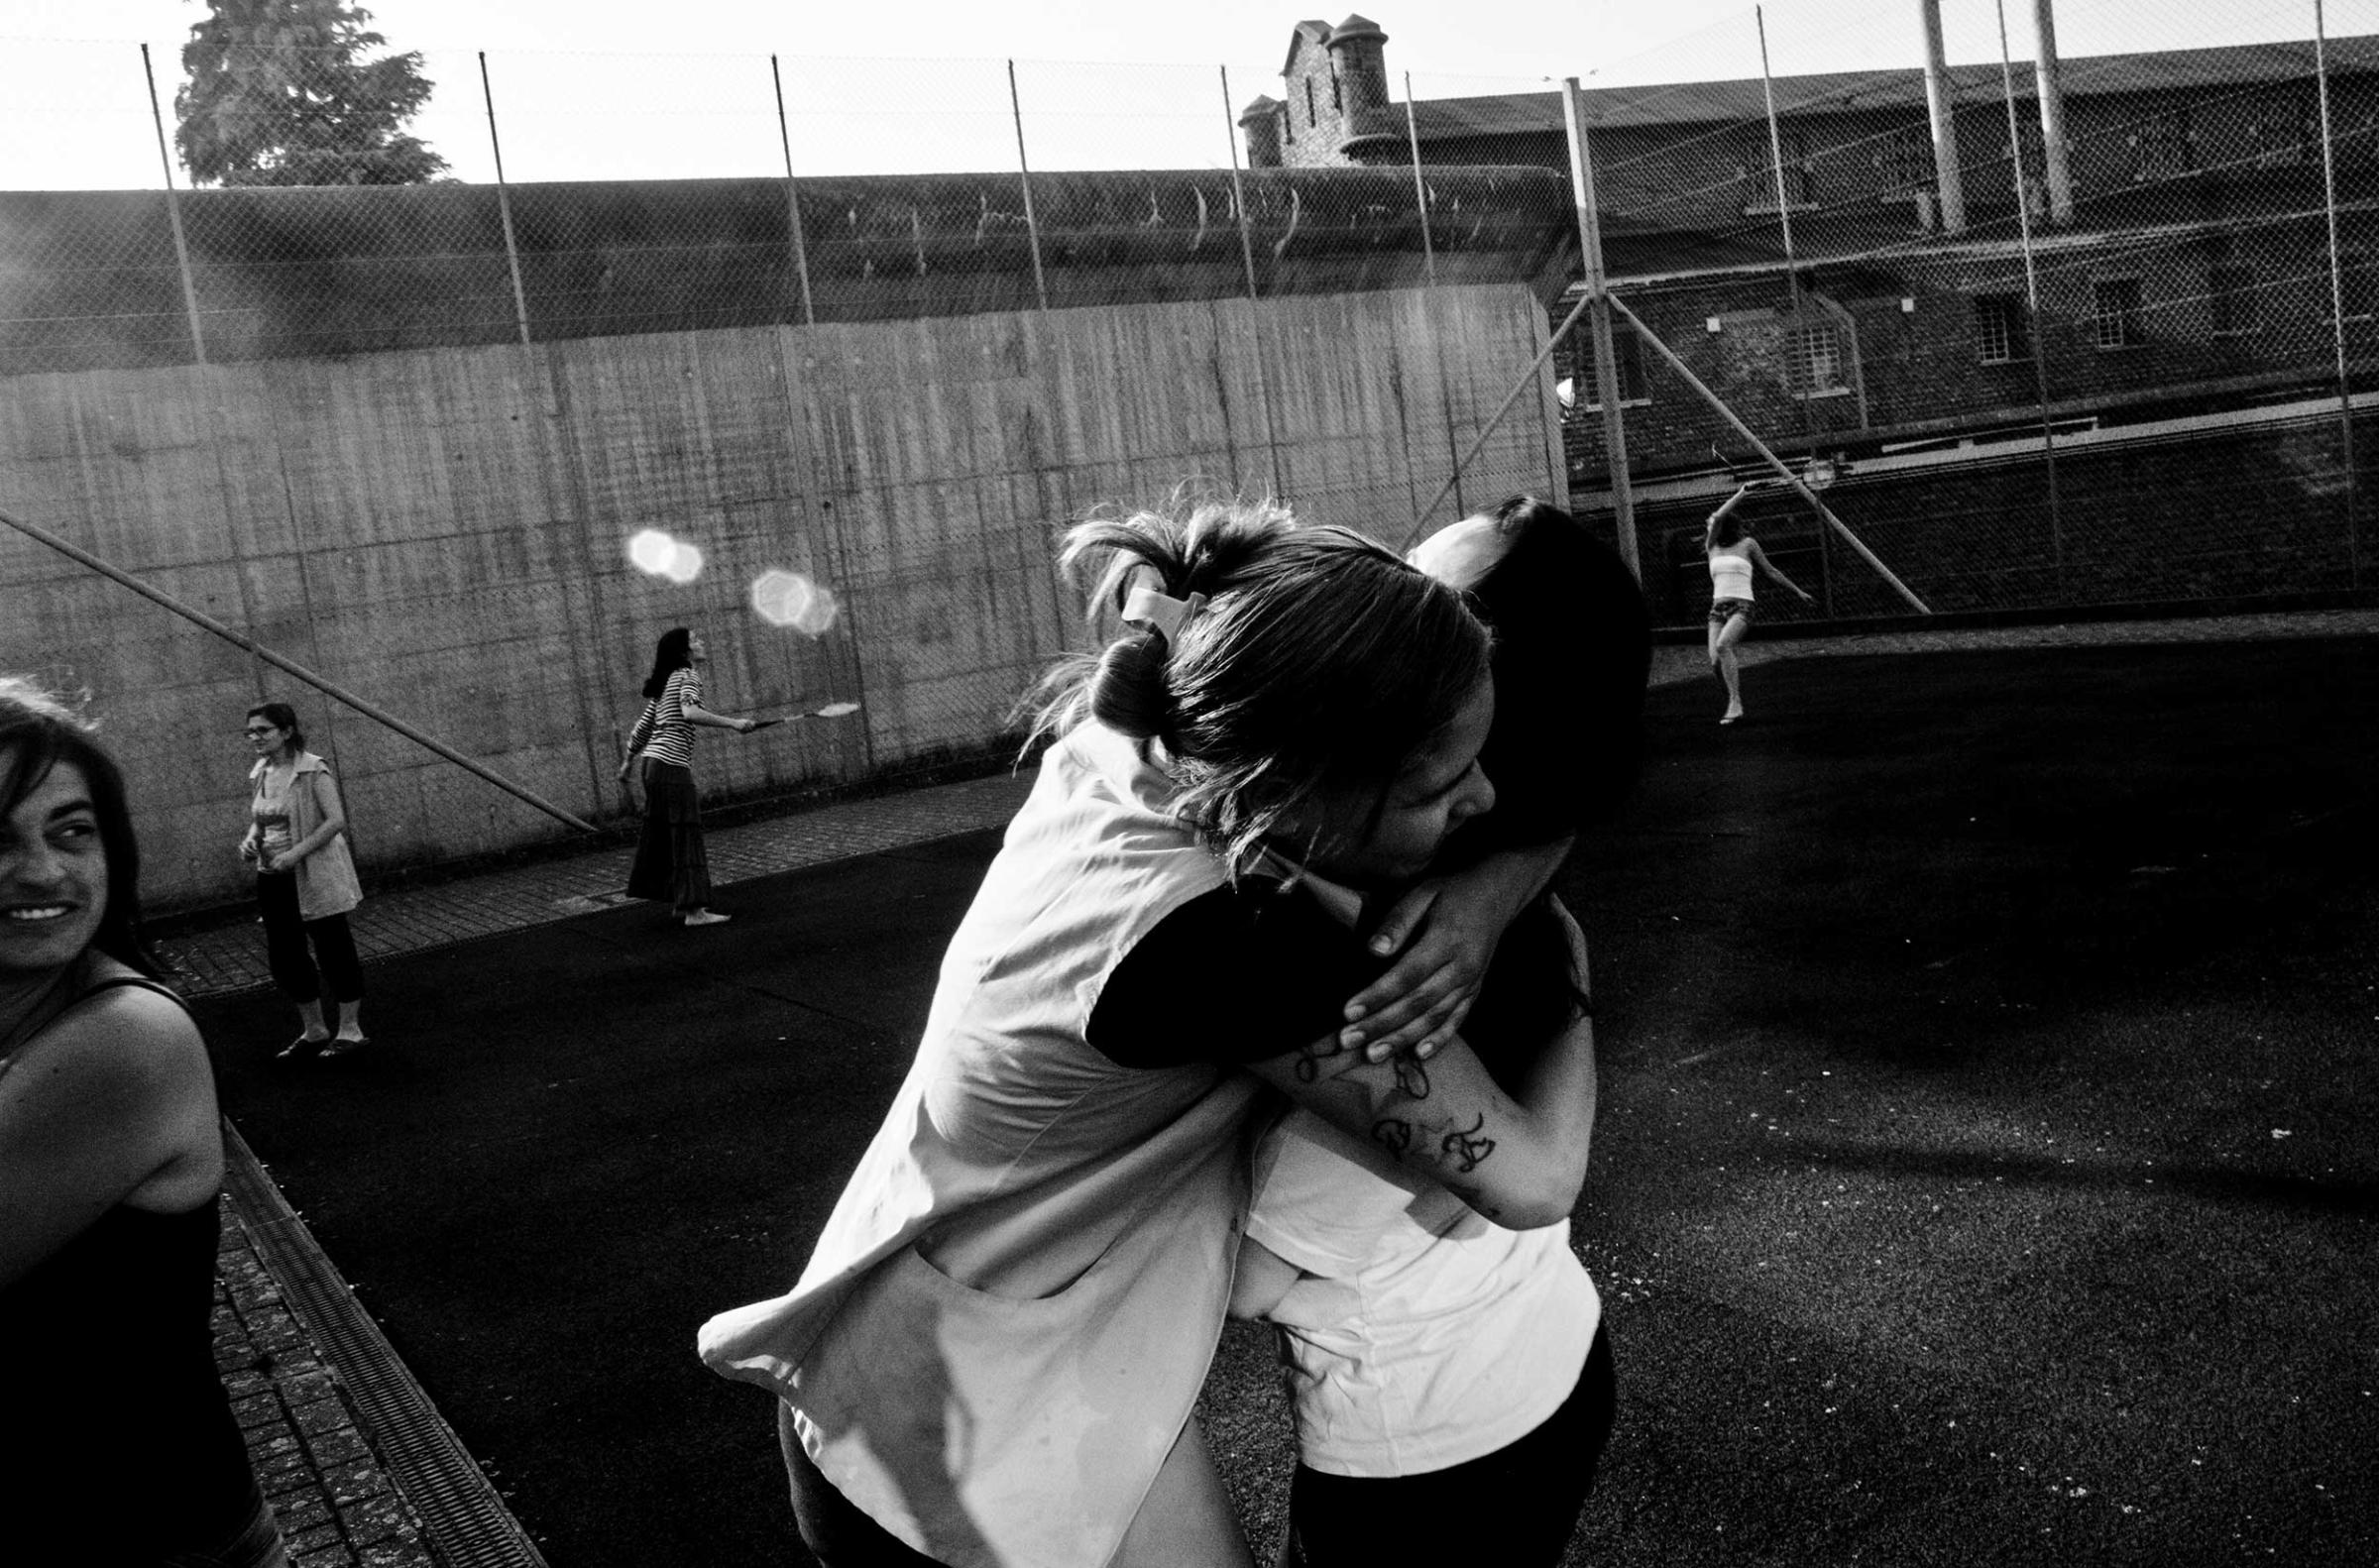 Two female prisoners hug during a badminton game in the courtyard of the prison for women in Berkendaele, Brussels, Belgium. July 2012.